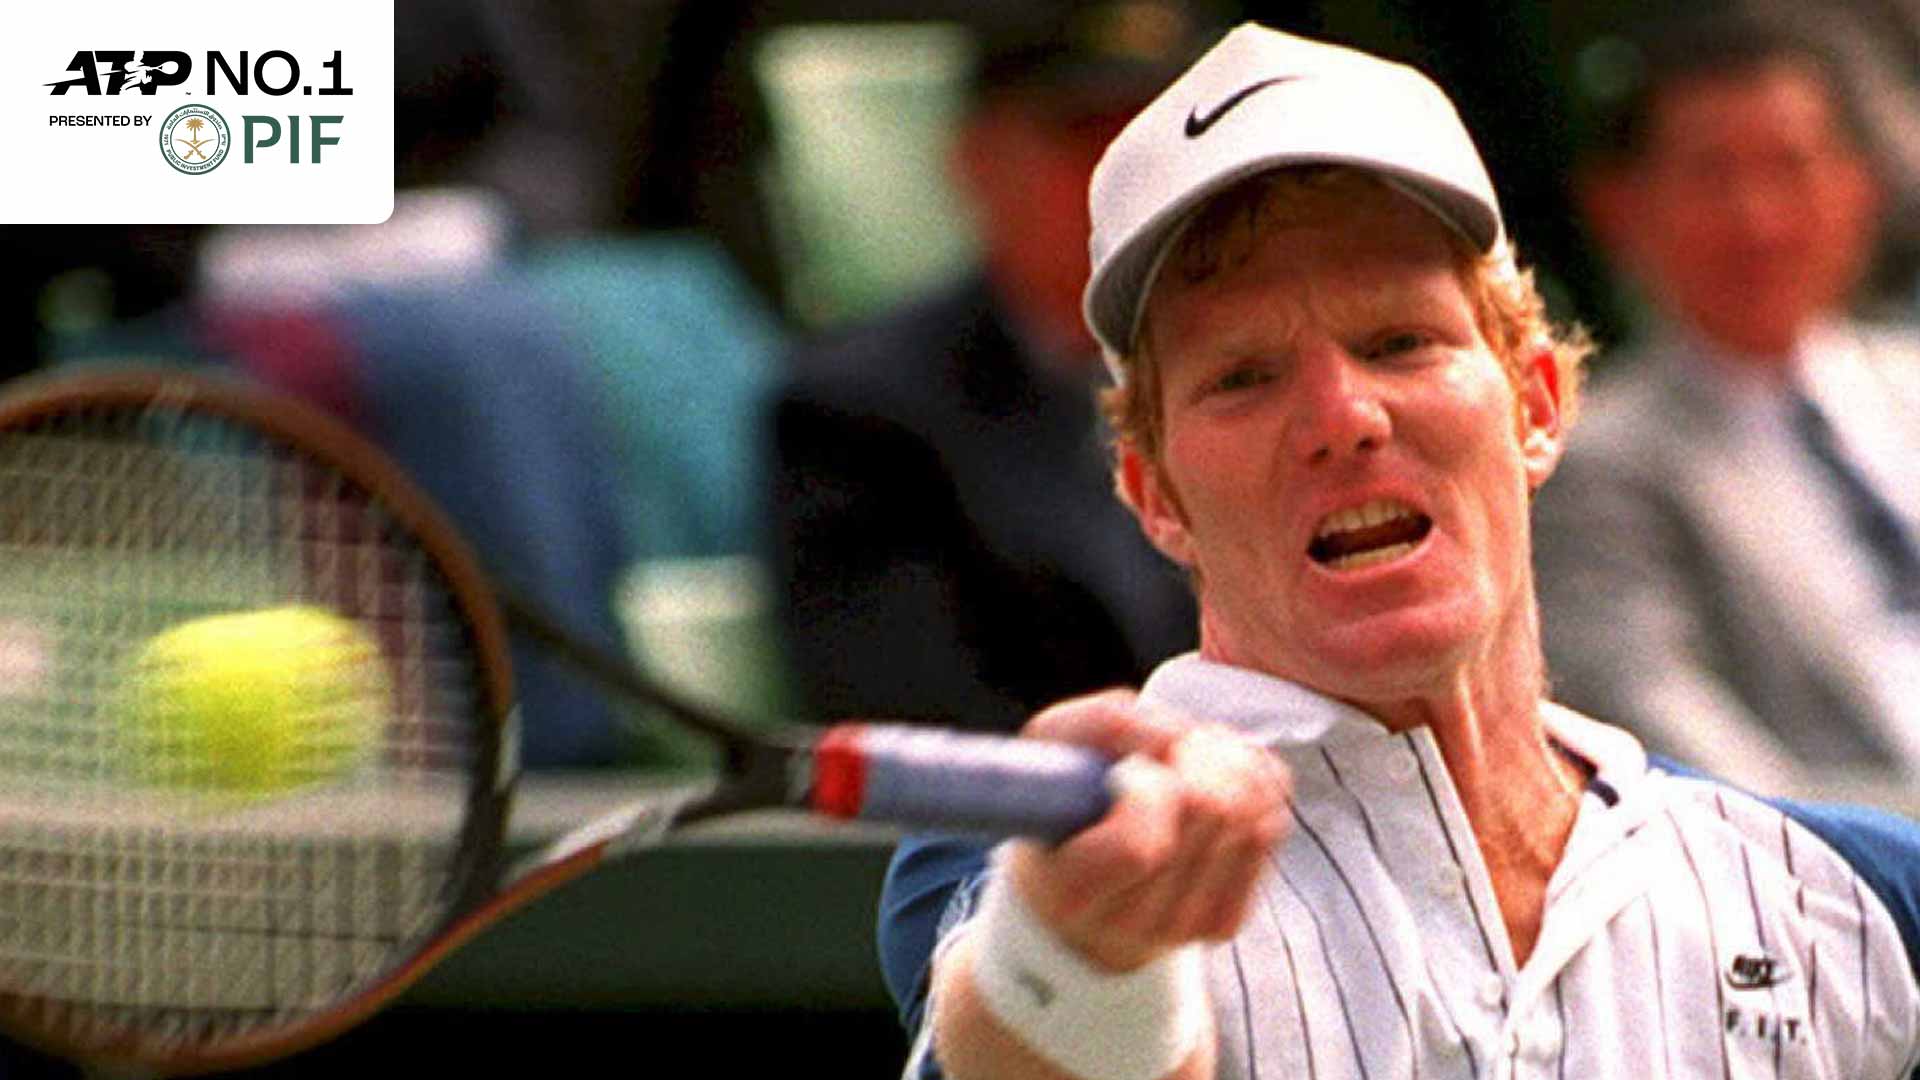 Jim Courier held the No. 1 spot in the PIF ATP Rankings for 58 weeks.